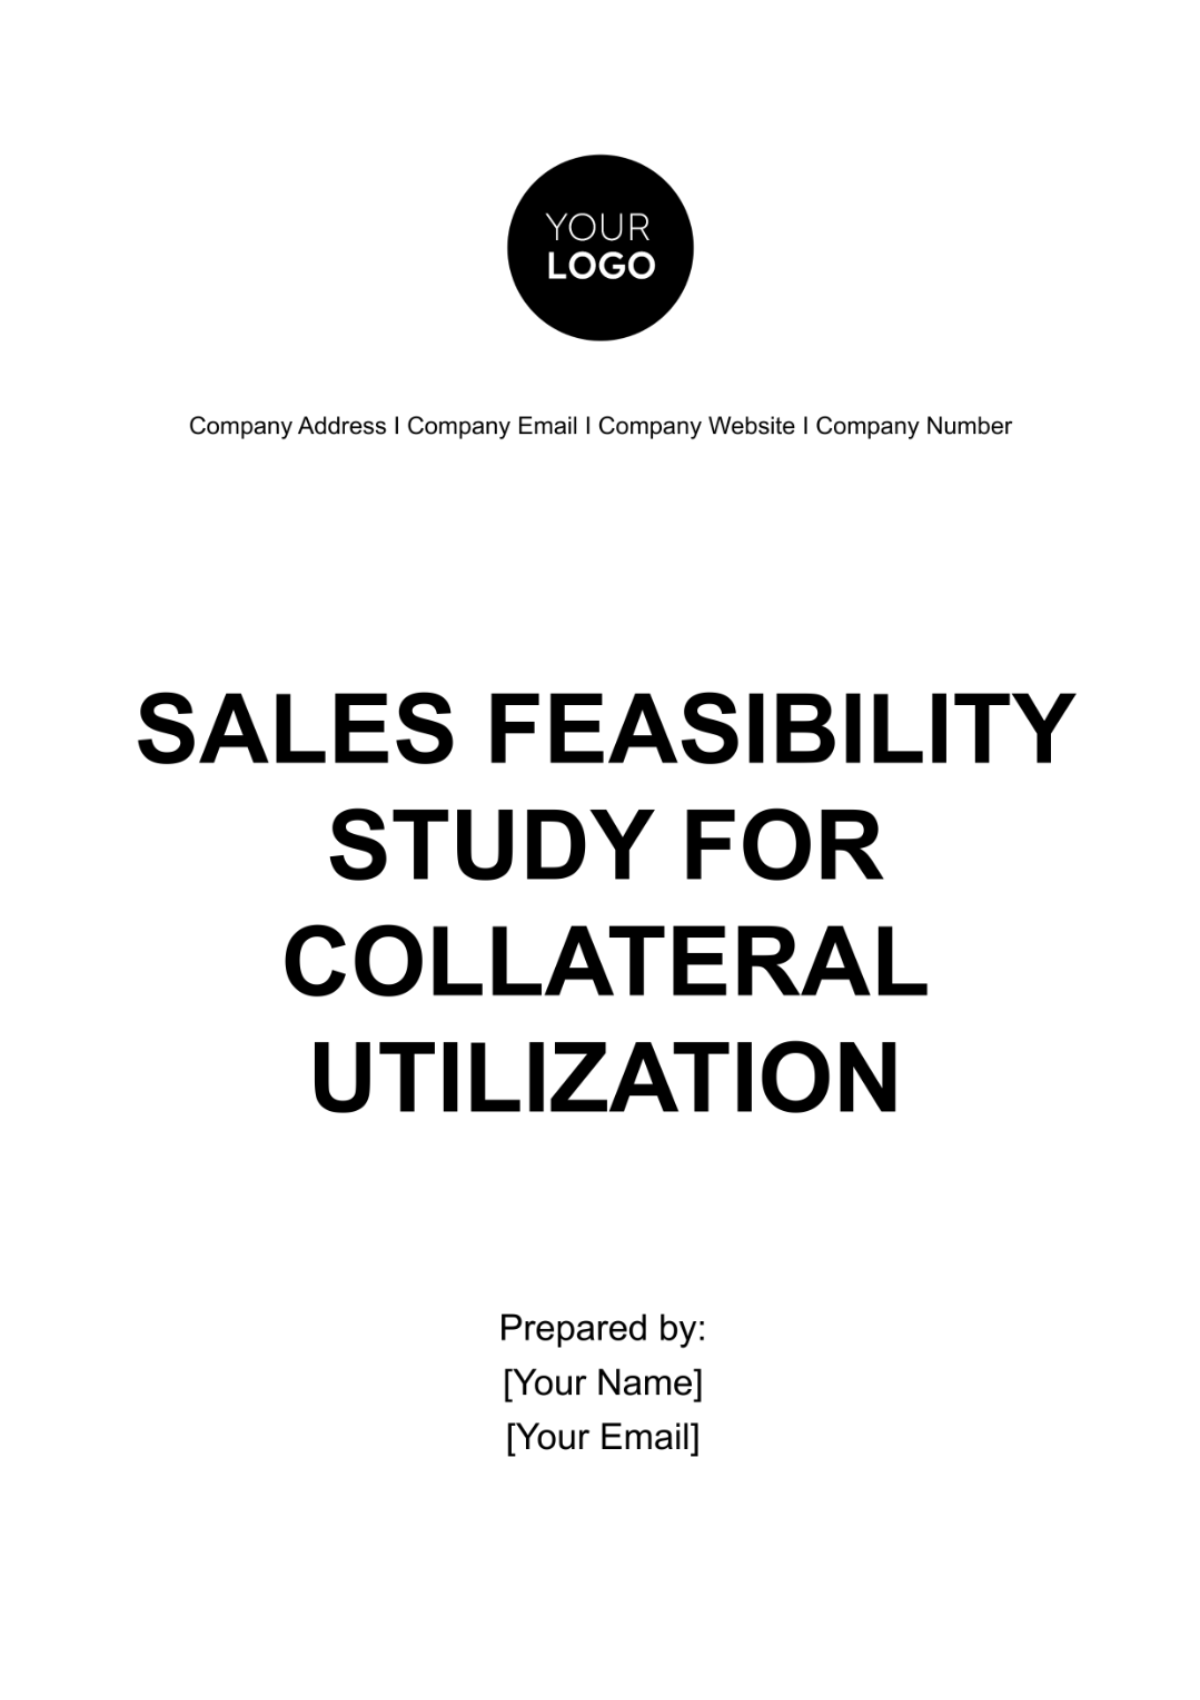 Free Sales Feasibility Study for Collateral Utilization Template